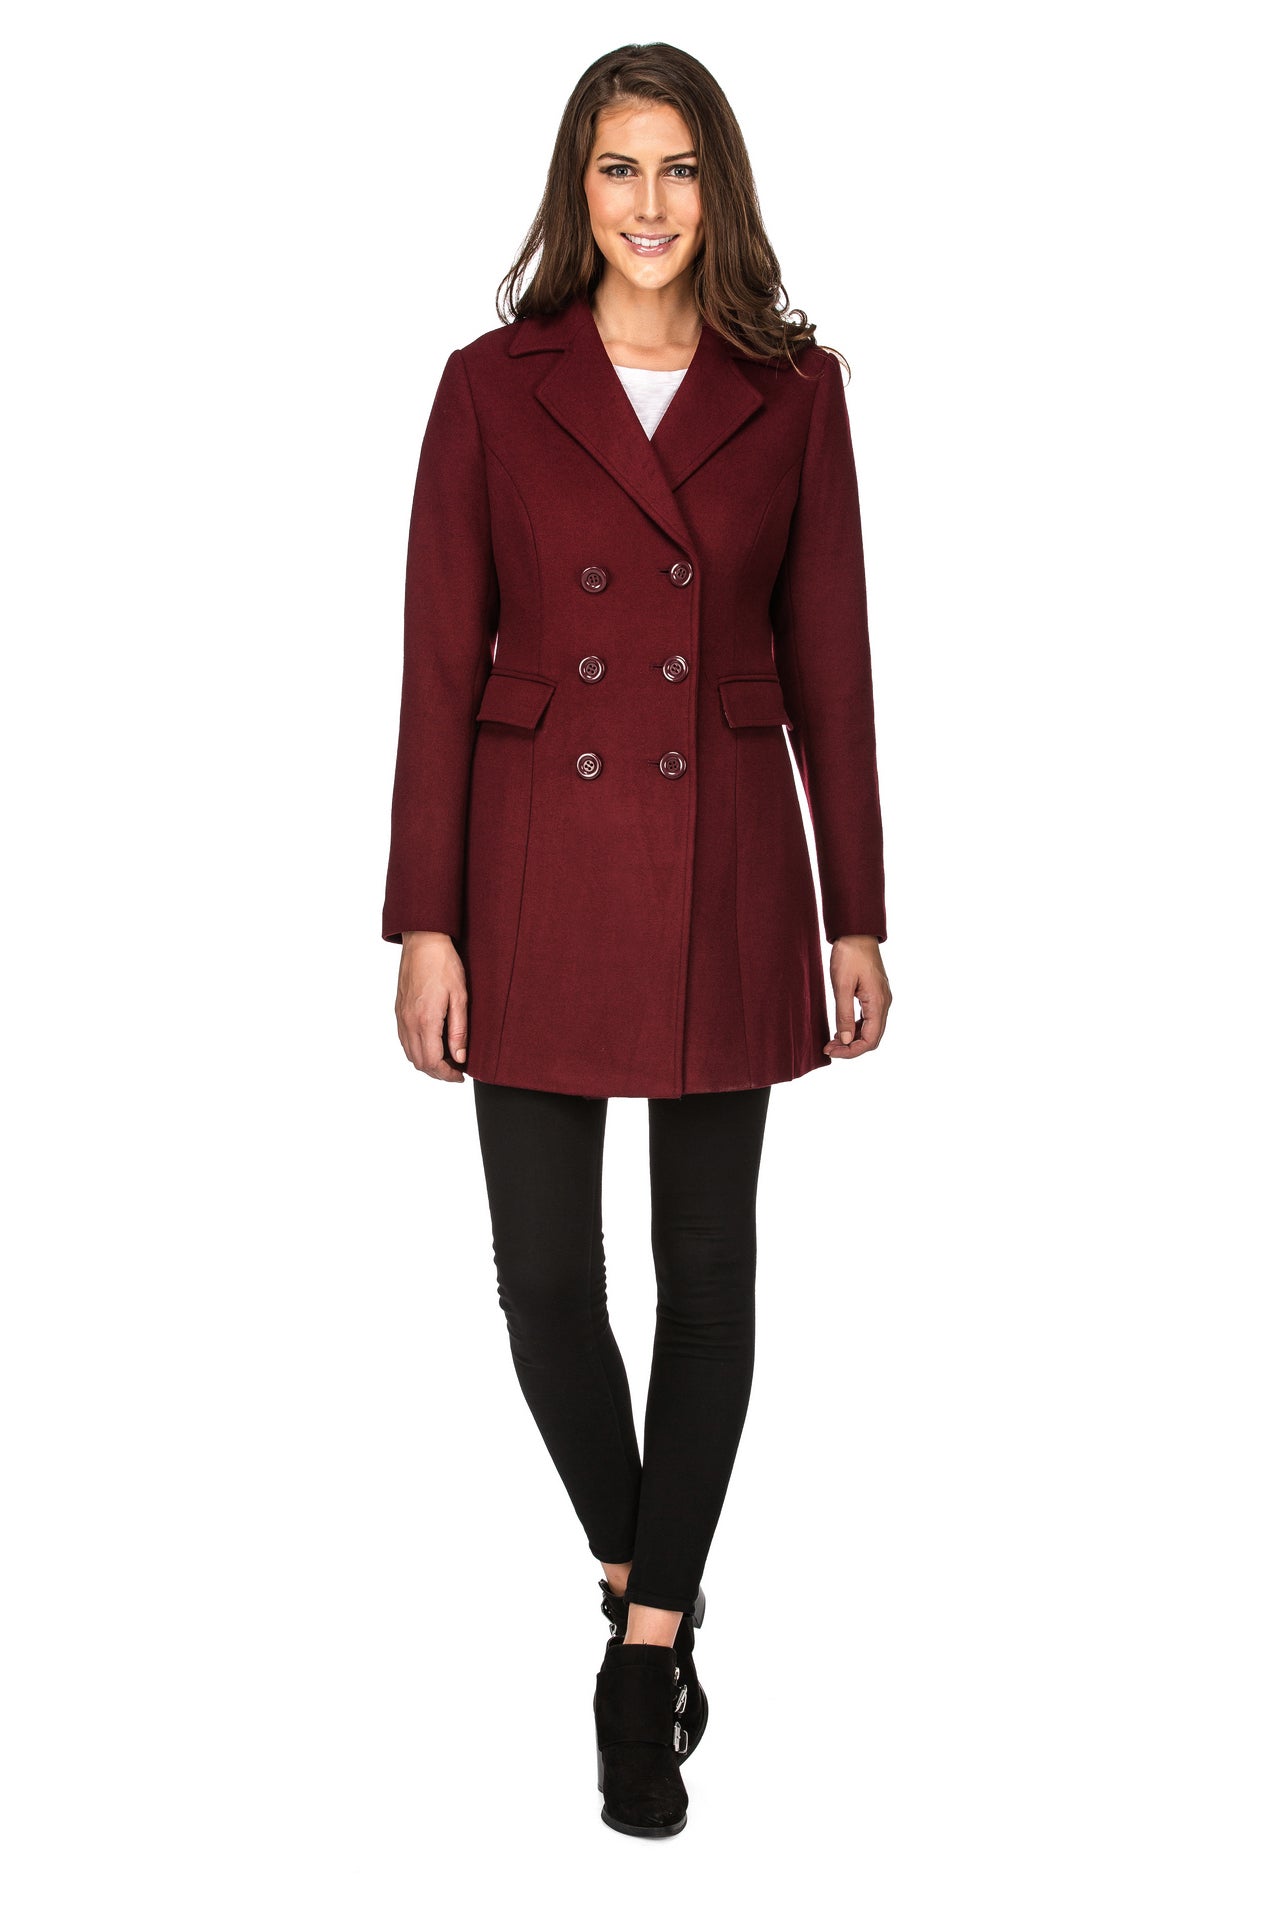 Haute Edition Women's Double Breasted Wool Blend Peacoat